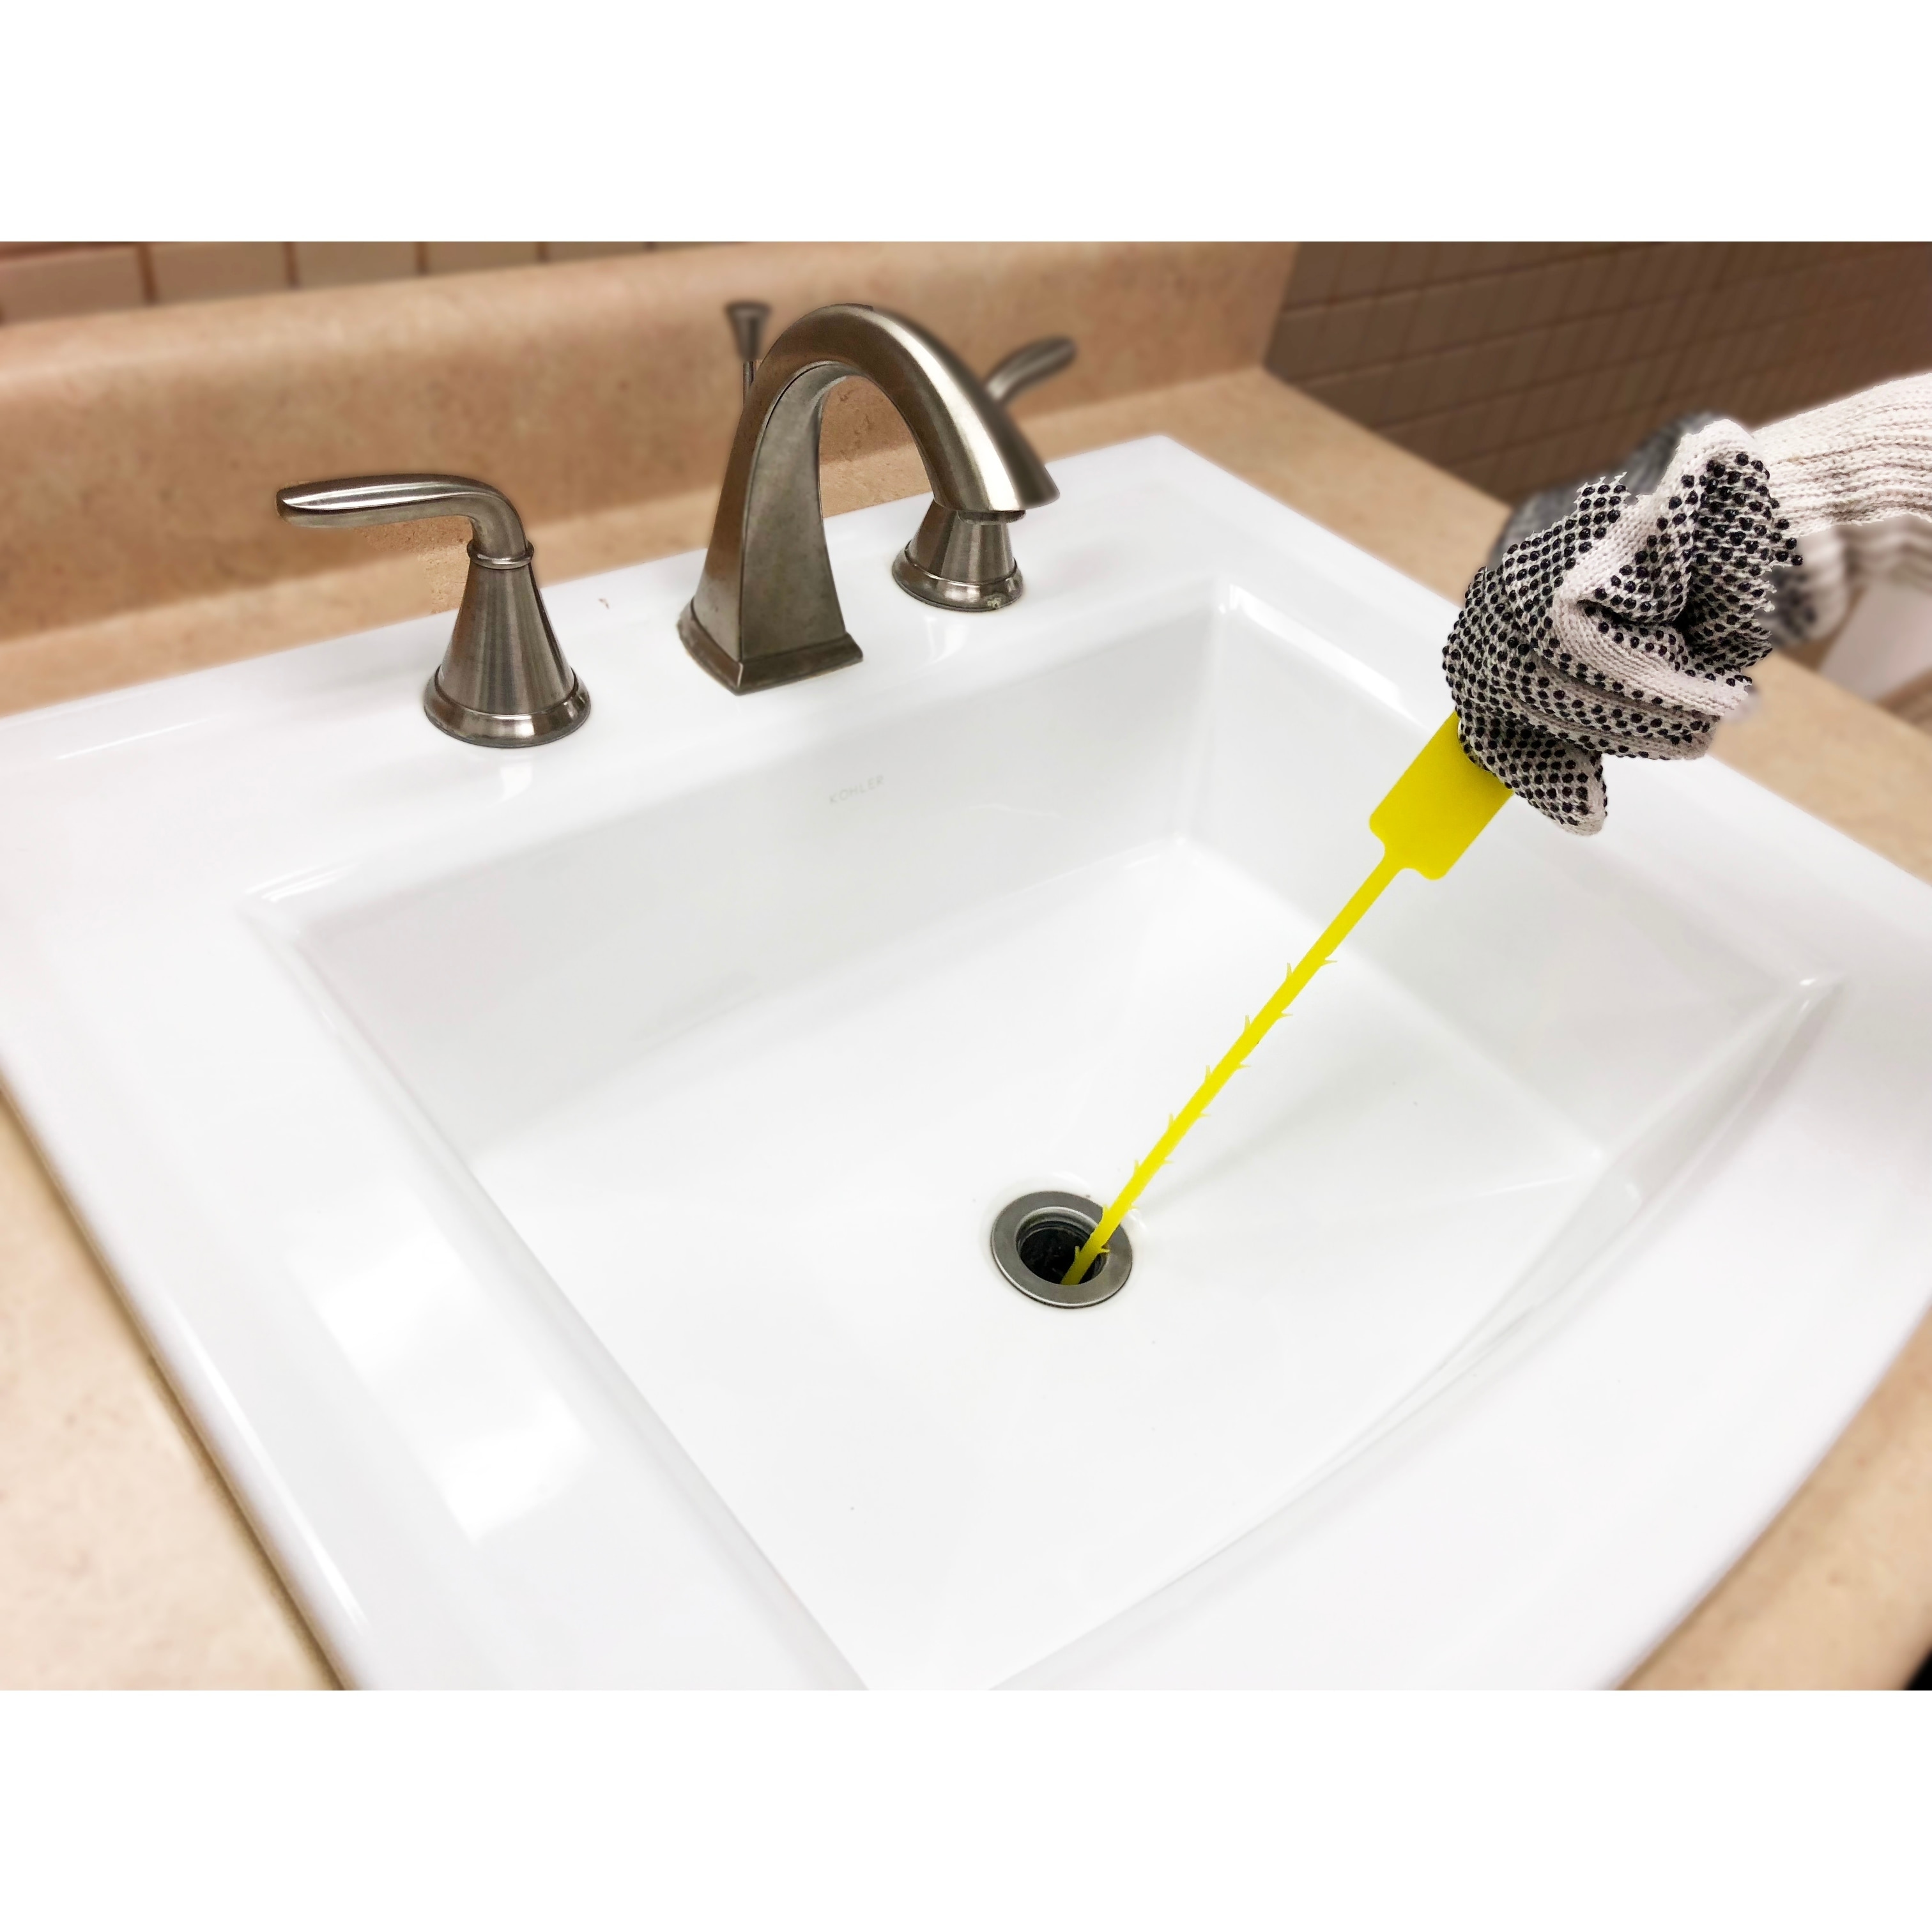 https://ak1.ostkcdn.com/images/products/21943233/TheWorks-ZIP-IT-DRAIN-CLEANING-TOOL-c6cc490c-bc93-4fe8-8e3b-d74b6b2d2a77.jpg